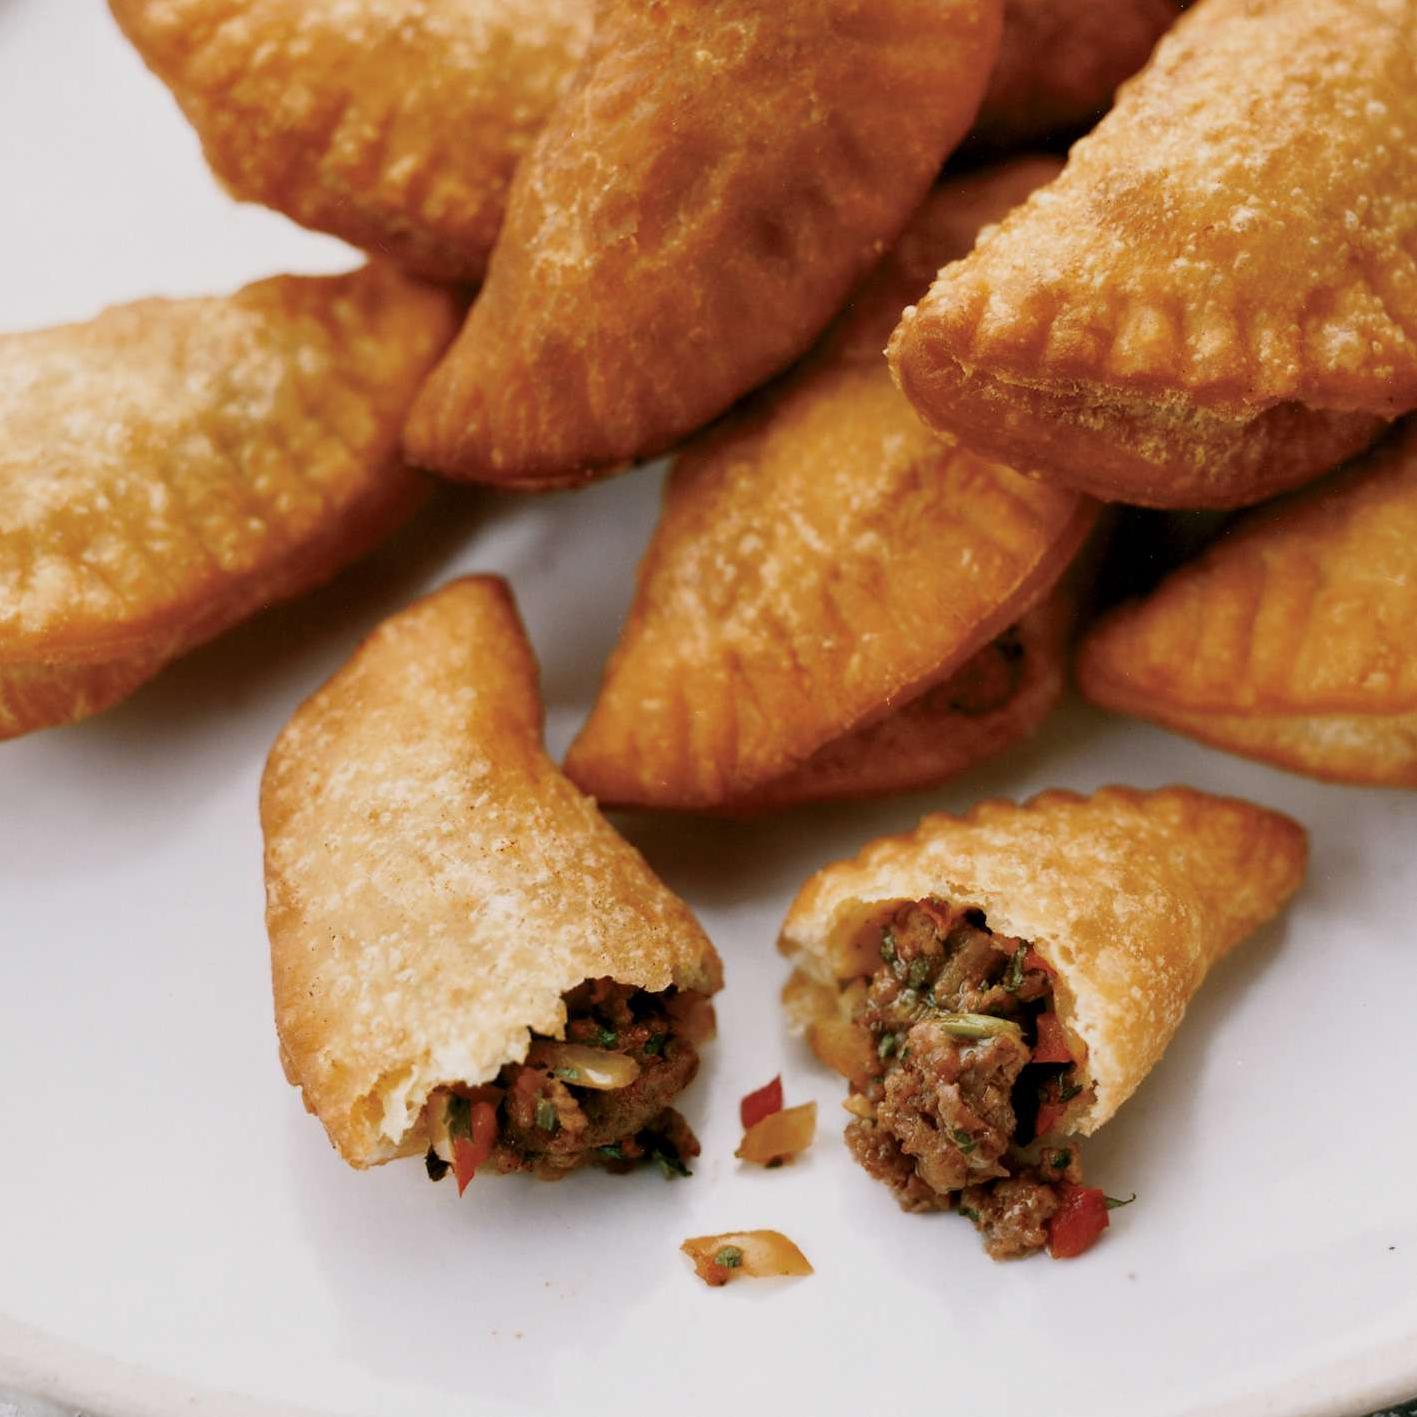  These empanadas are a great way to use up any leftover meat or veggies you may have in your fridge.